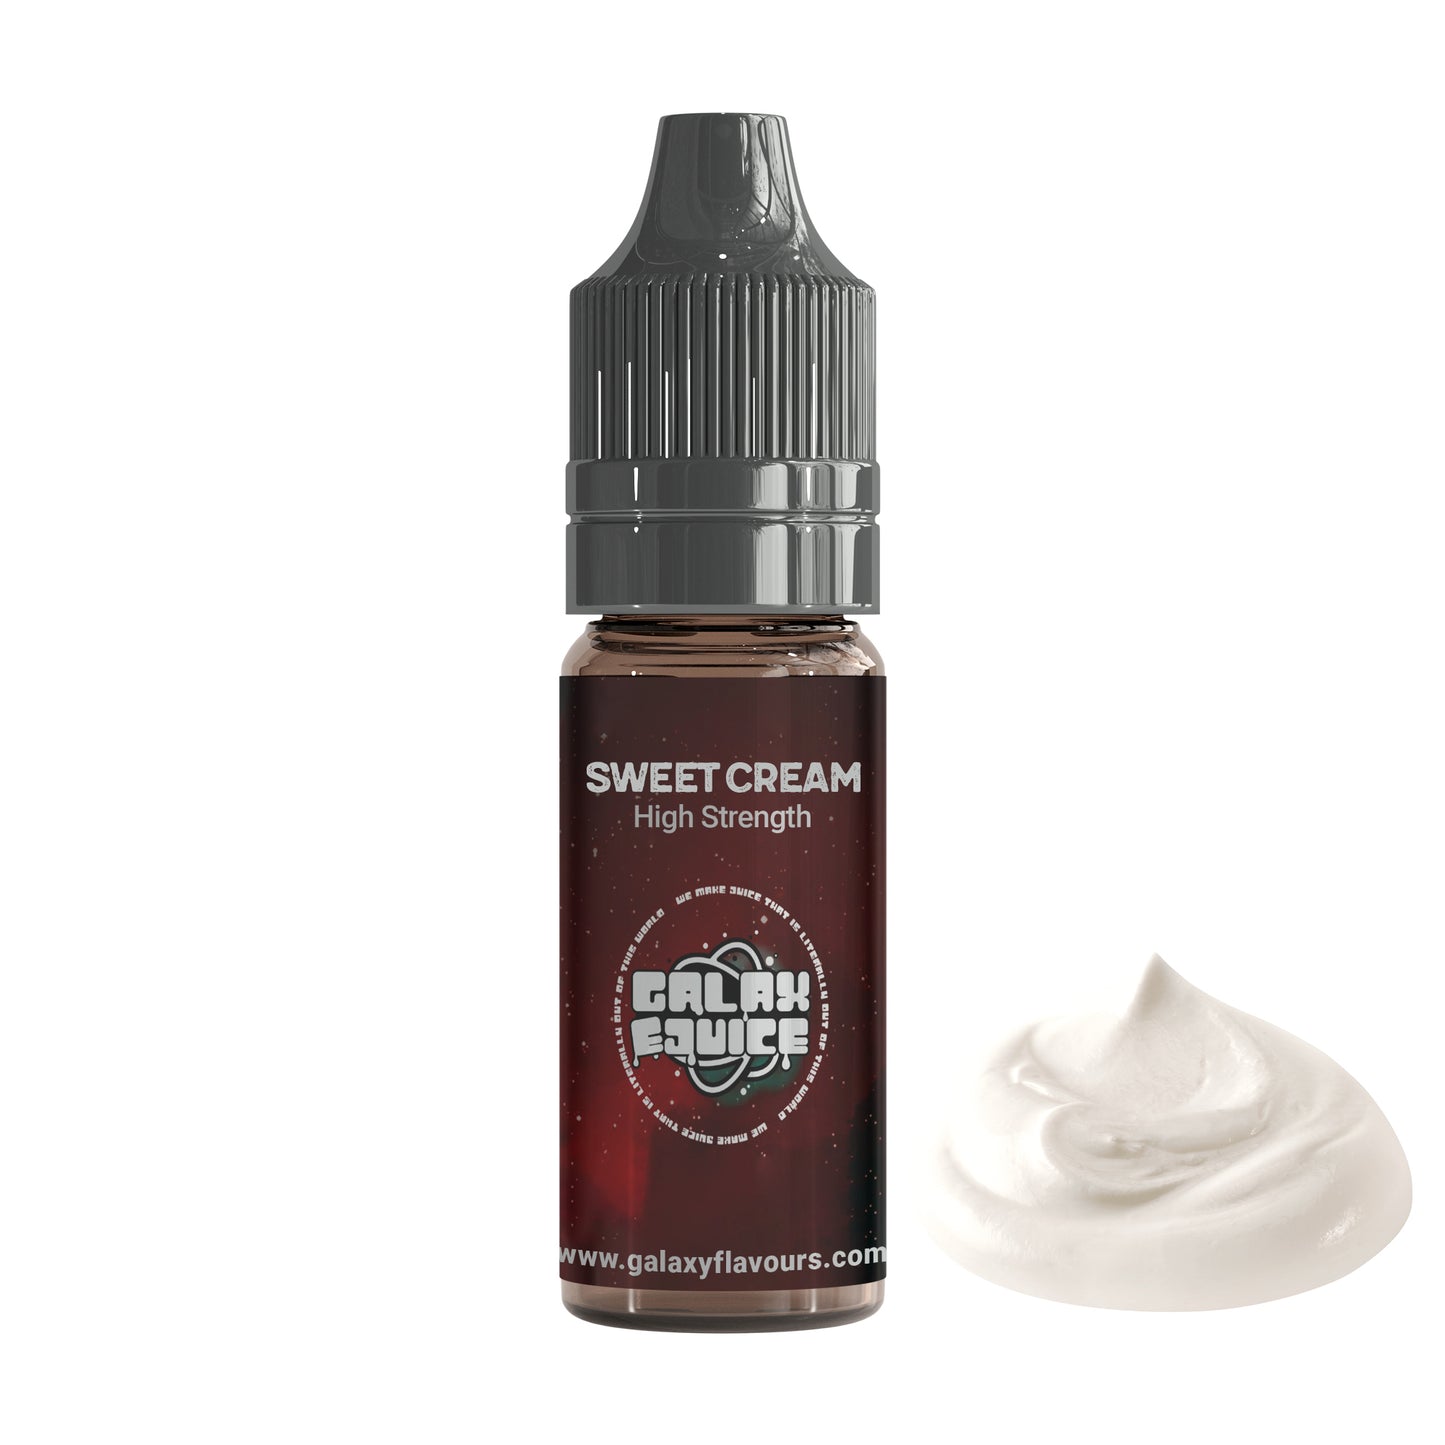 Sweet Cream High Strength Professional Flavouring.